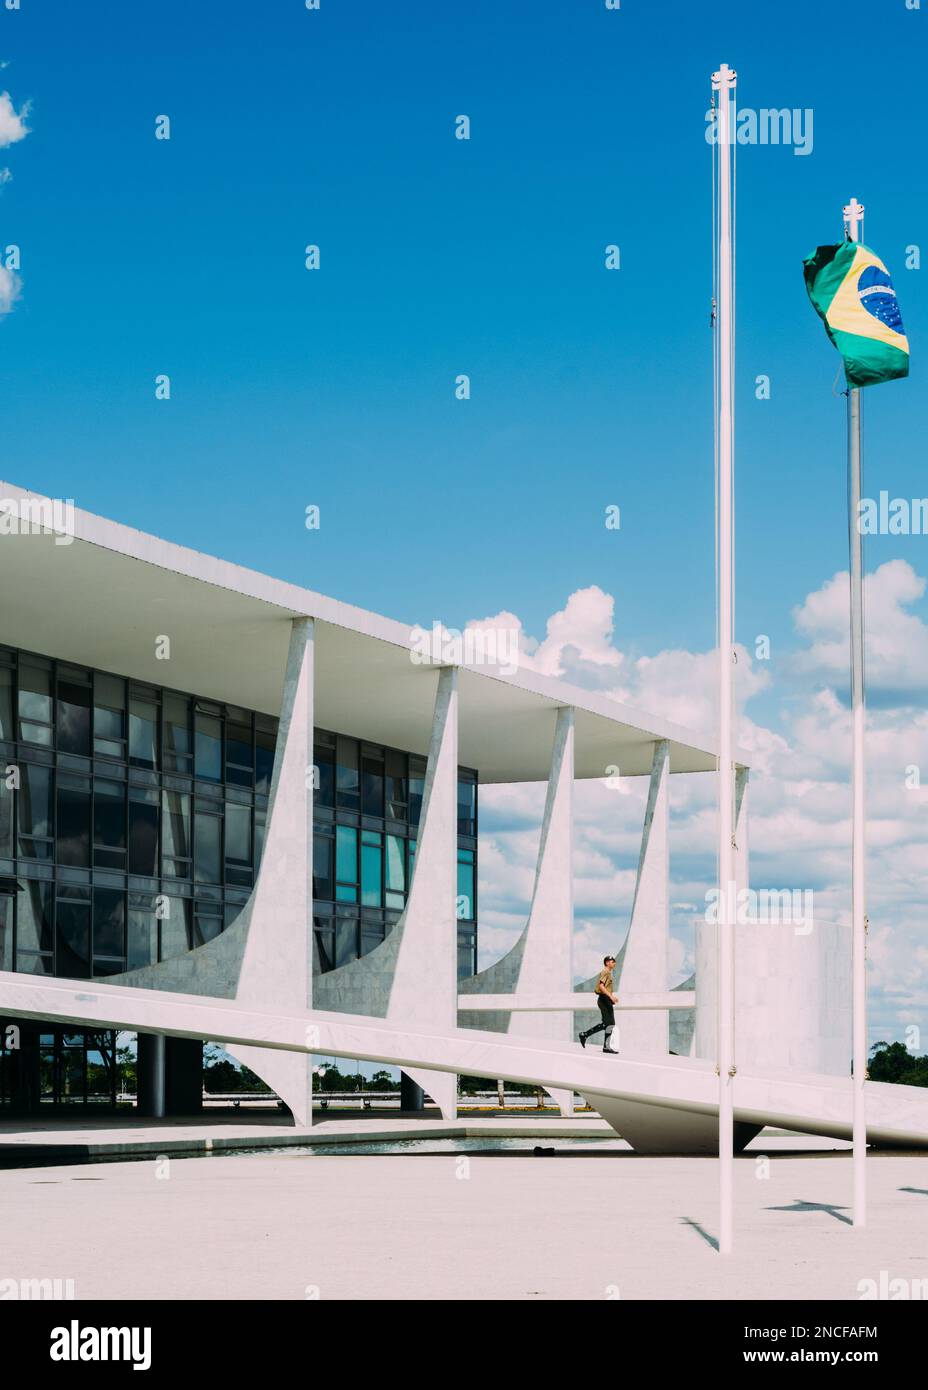 Brasilia, Brazil - February 13, 2023: Soldier at the Three Powers Square in Brasilia, where the iconic buildings of the federal capital of Brazil Stock Photo